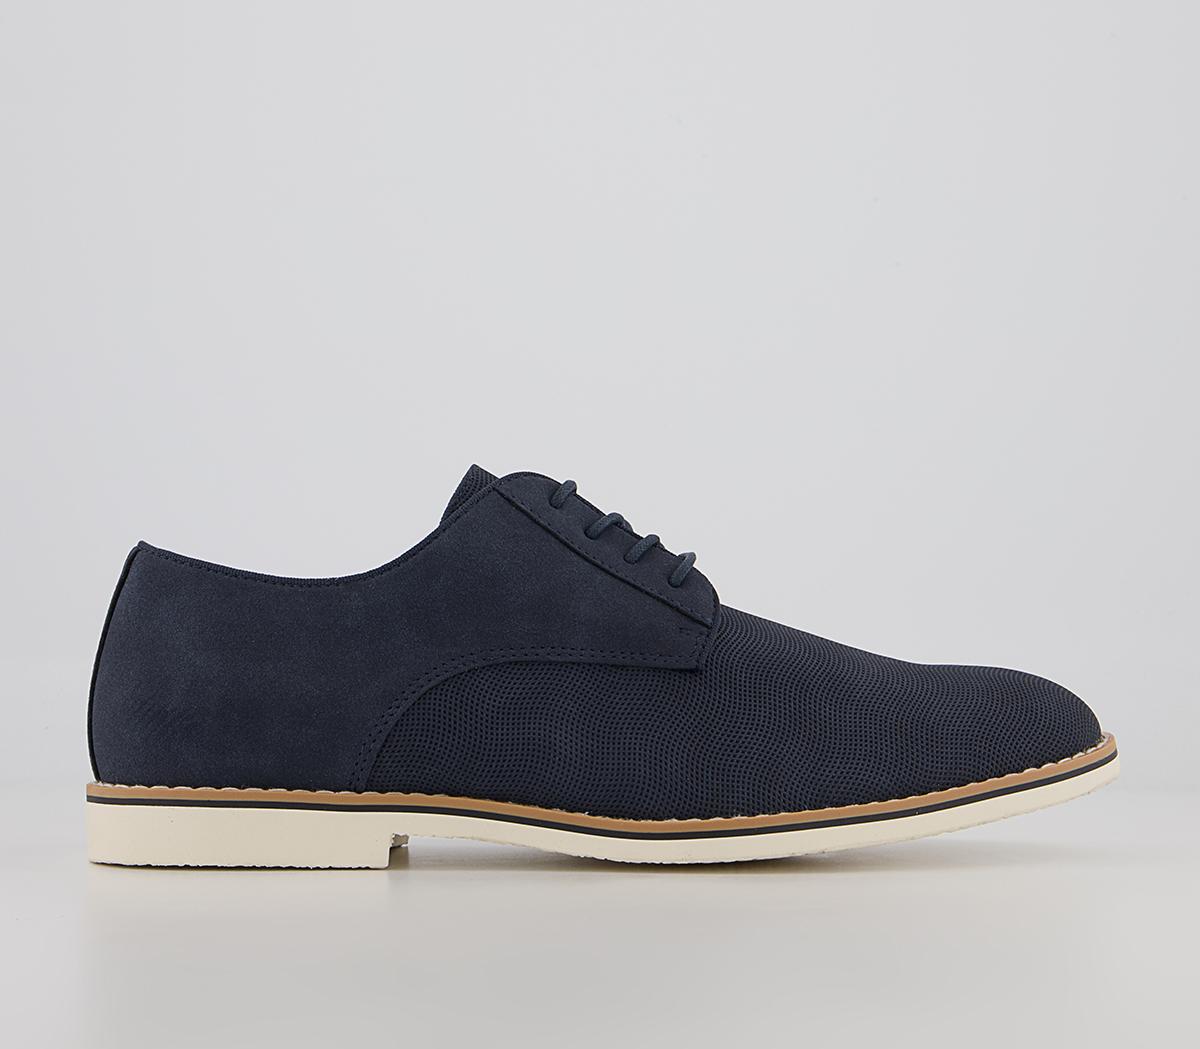 OFFICECheadle White Sole Embossed Vamp Derby ShoesNavy